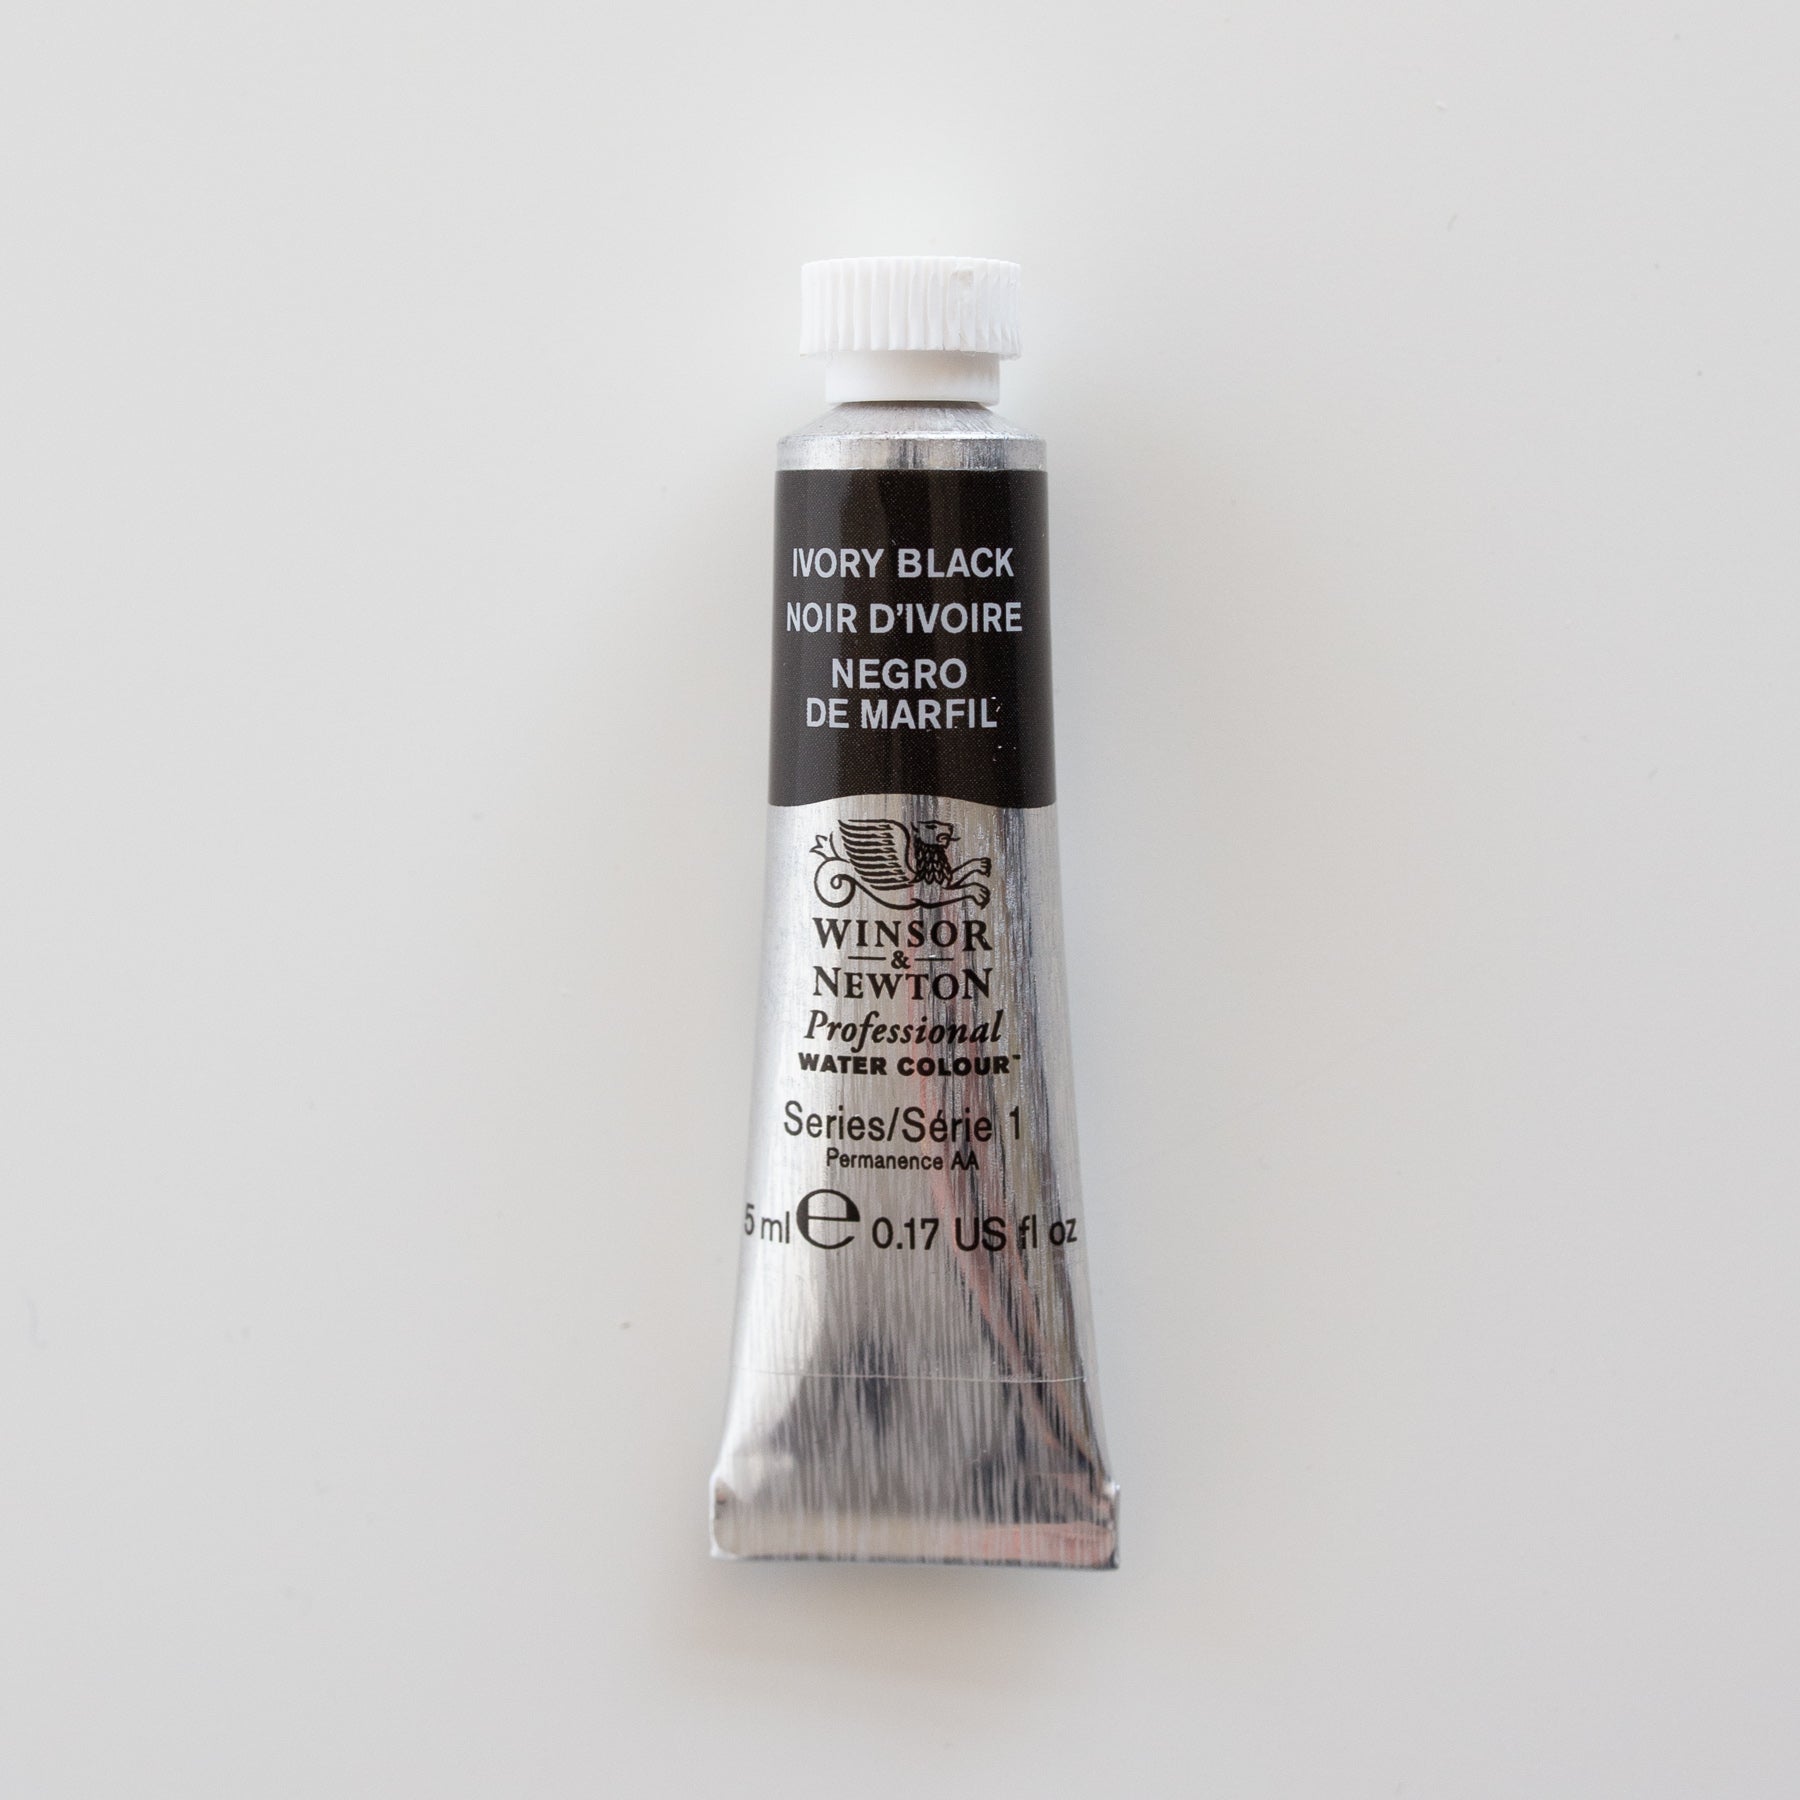 Winsor & Newton Professional Water Colours 5ml Ivory Black 1